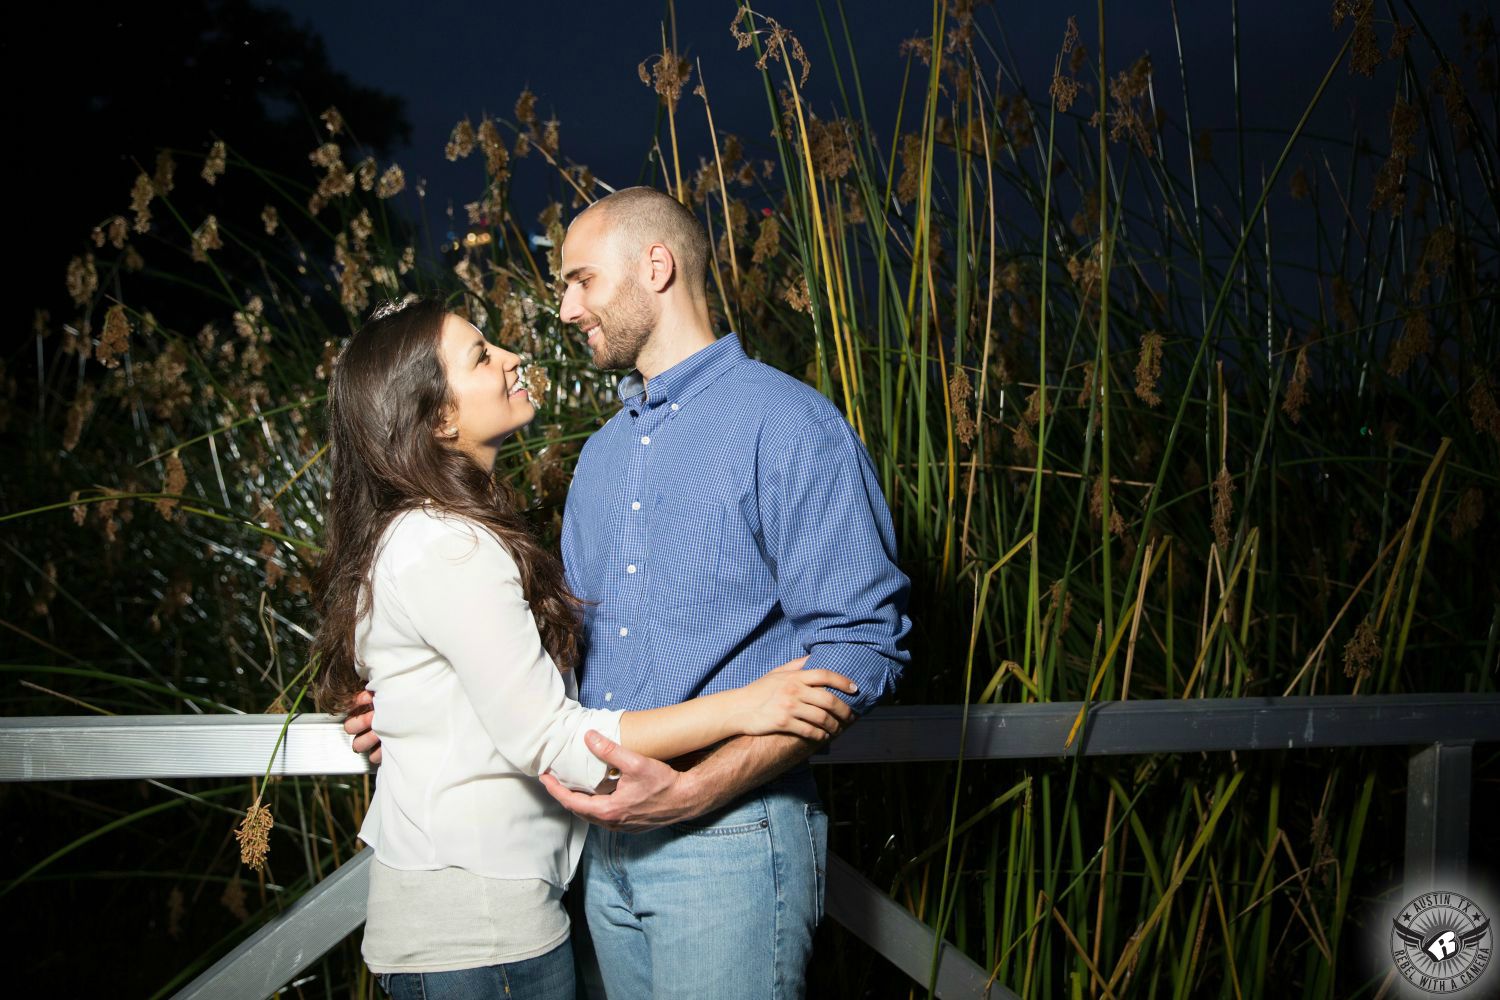 Brown haired Latino girl wearing white elbow length sweater and blue jeans happily looks into the eyes of a tall guy wearing a button up blue dress shirt and blue jeans in front of a railing on a boat dock with tall green reeds in the background at dusk on Ladybird Lake in this friendly engagement photo in downtown Austin, Texas.